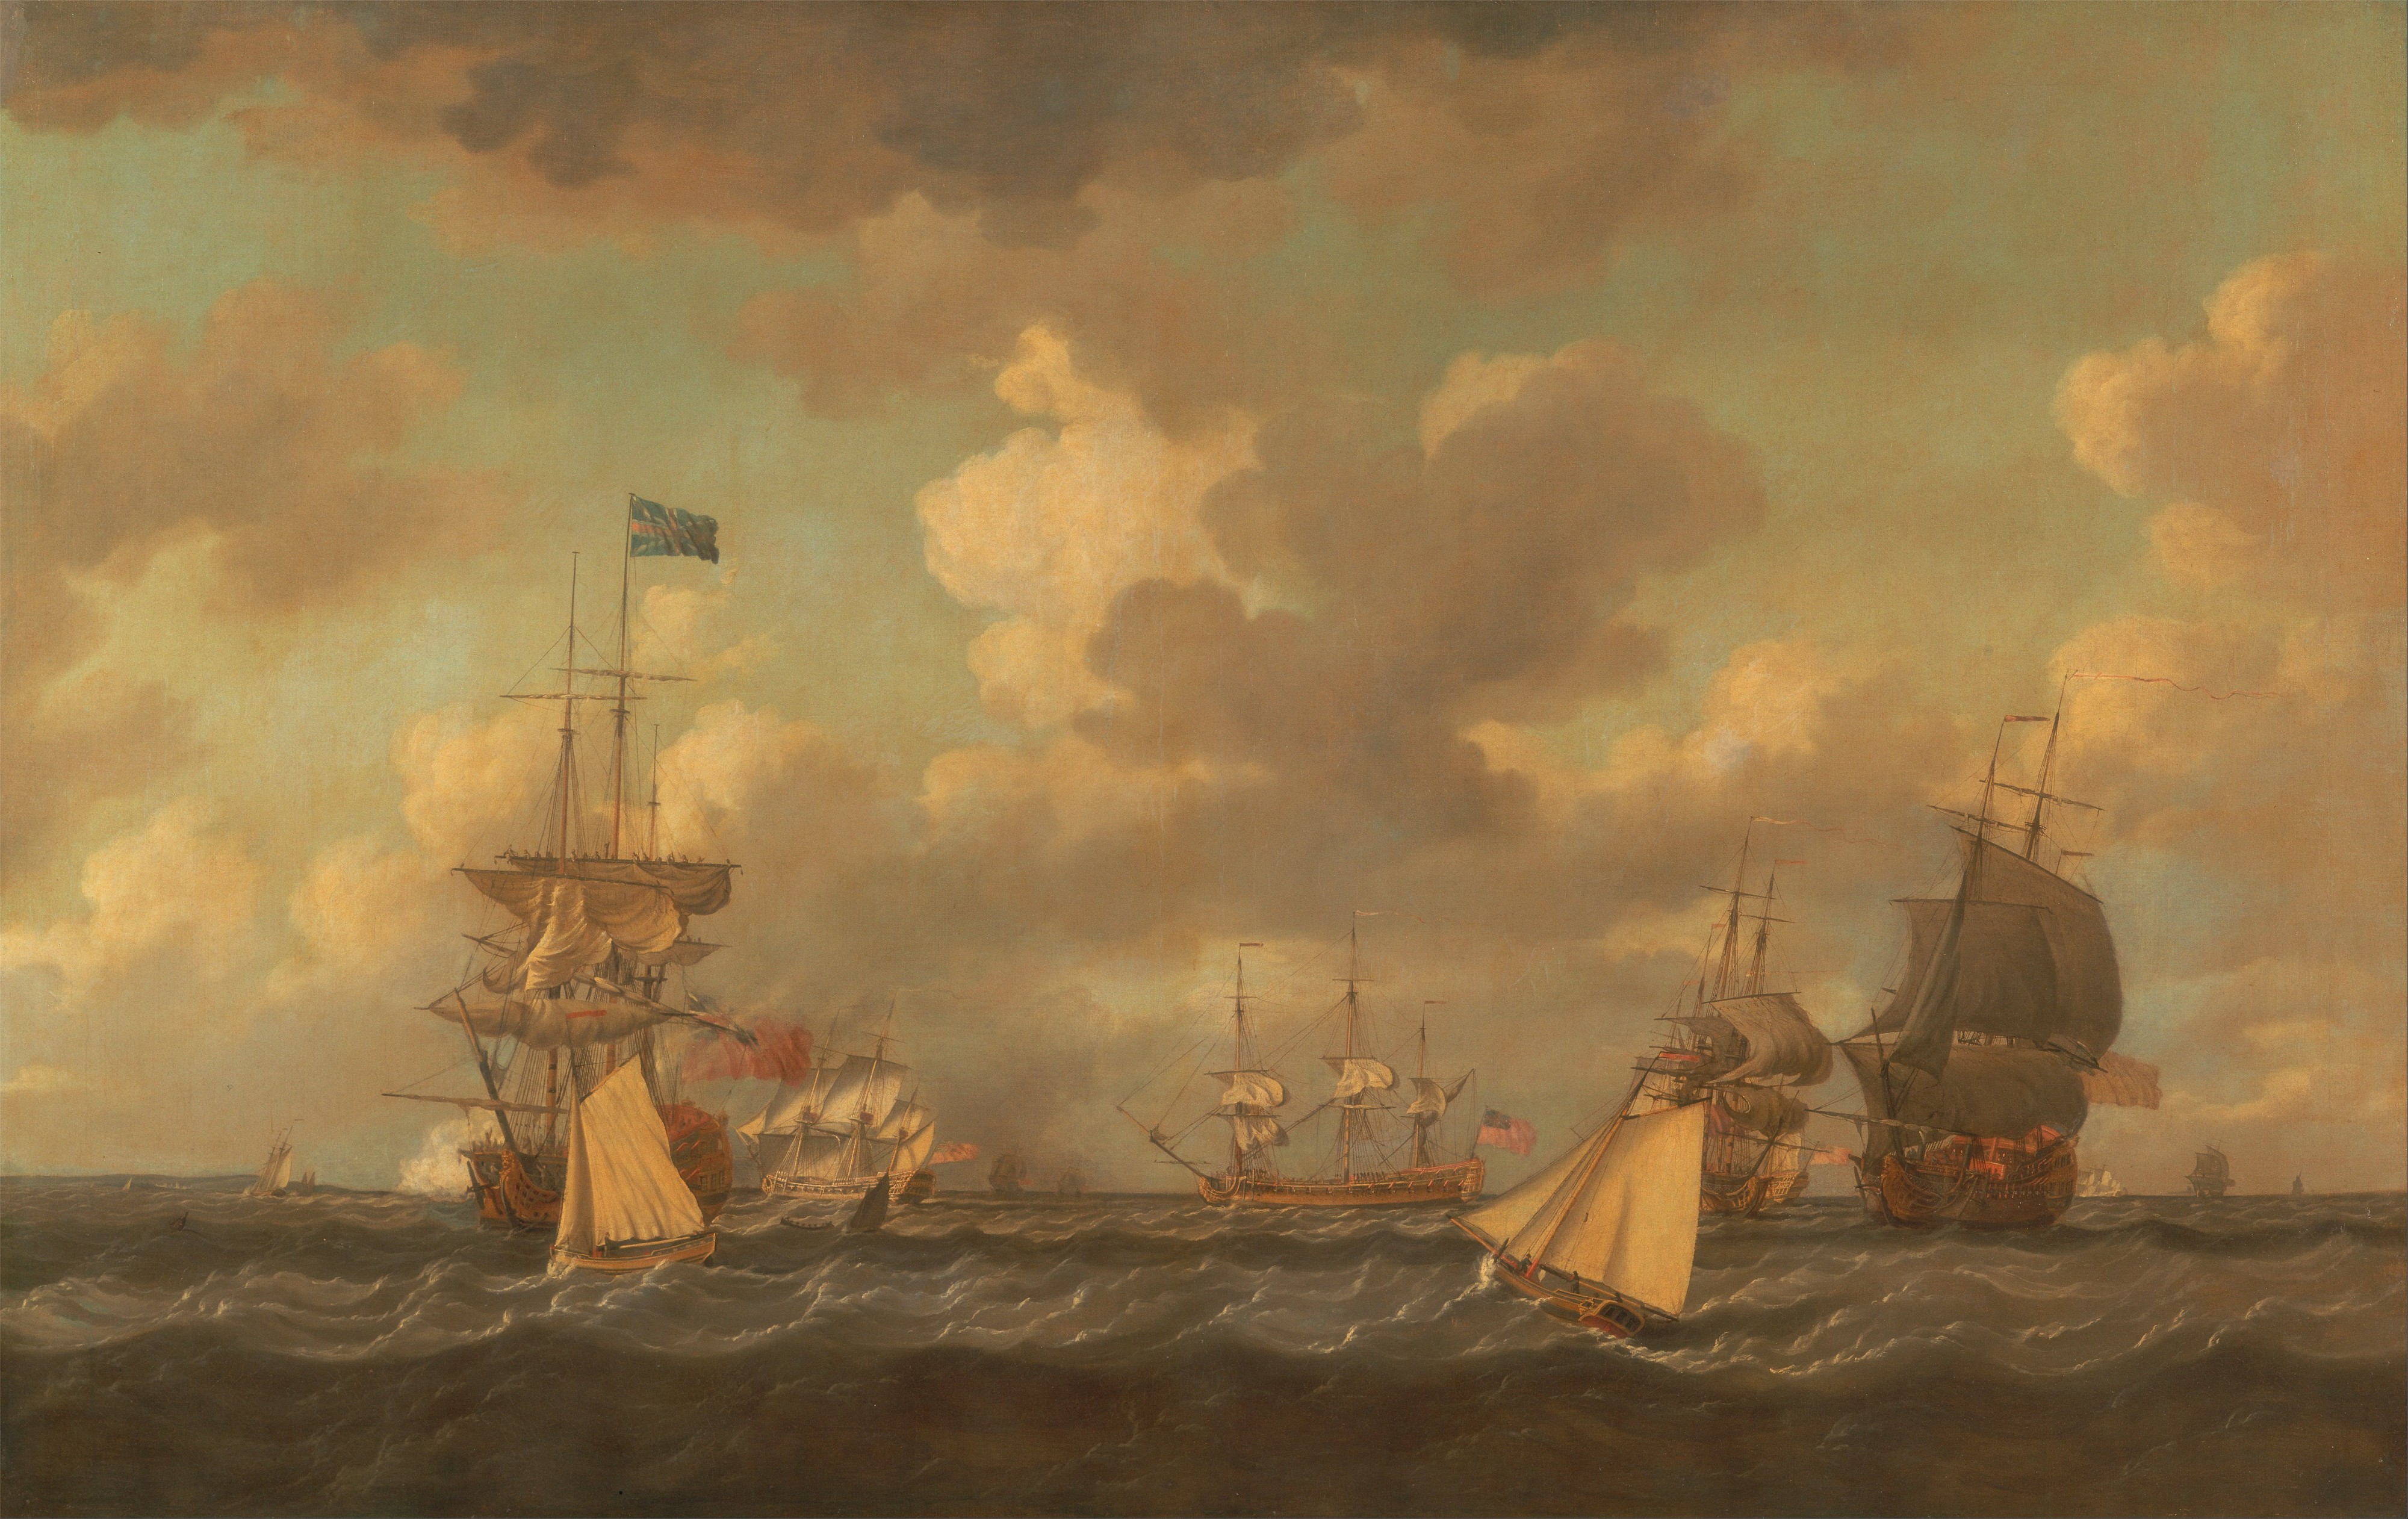 Dominic Serres - English Ships Coming to Anchor in a Fresh Breeze - Google Art Project